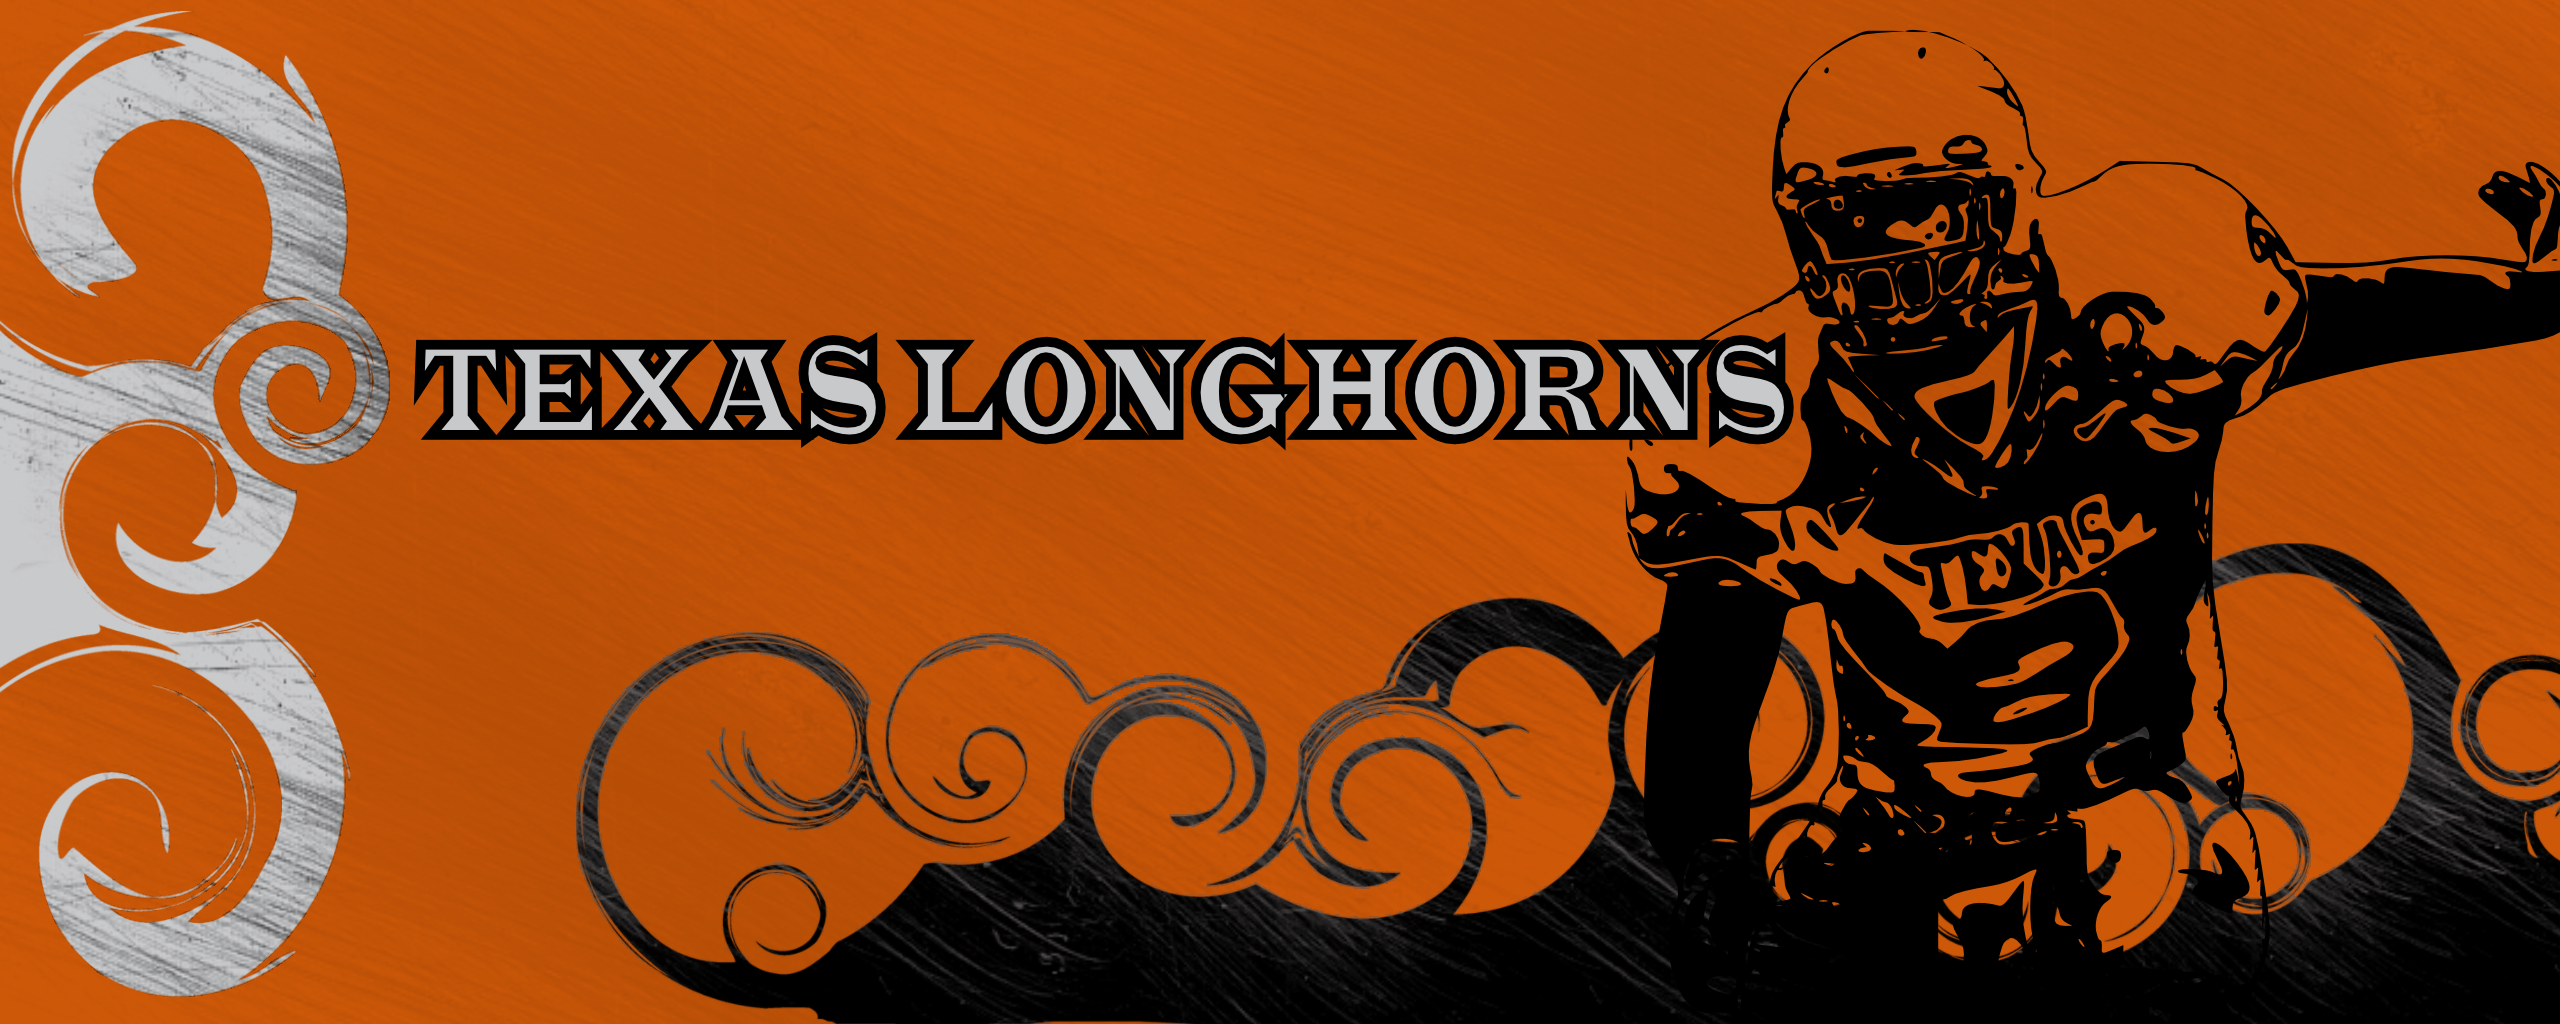 Texas Longhorn Home University Co Op Wallpaper Picture to pin